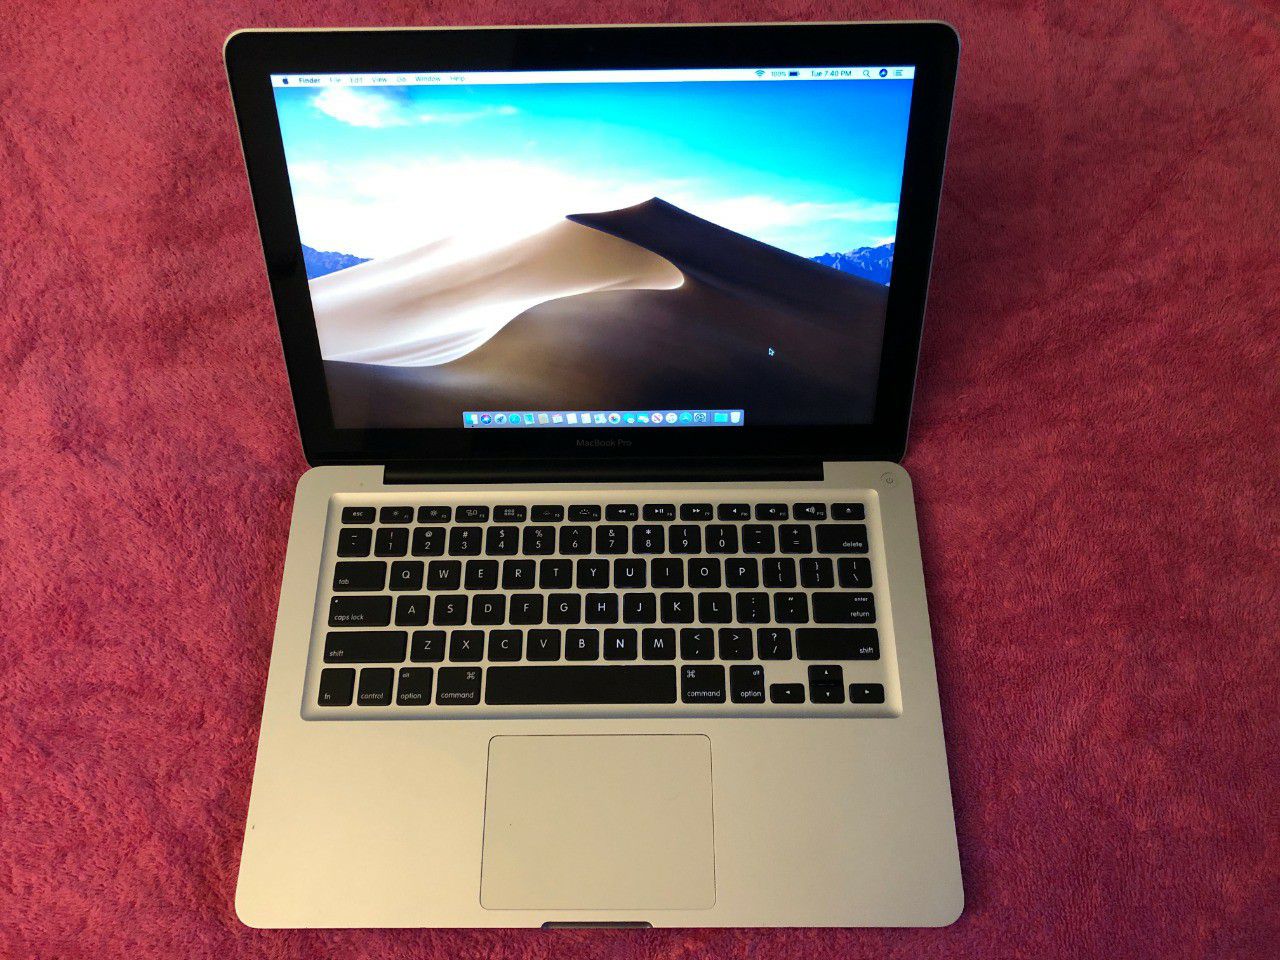 Mid 2012 13" MacBook Pro with Brand New 480 GB SSD-(Works Flawless).